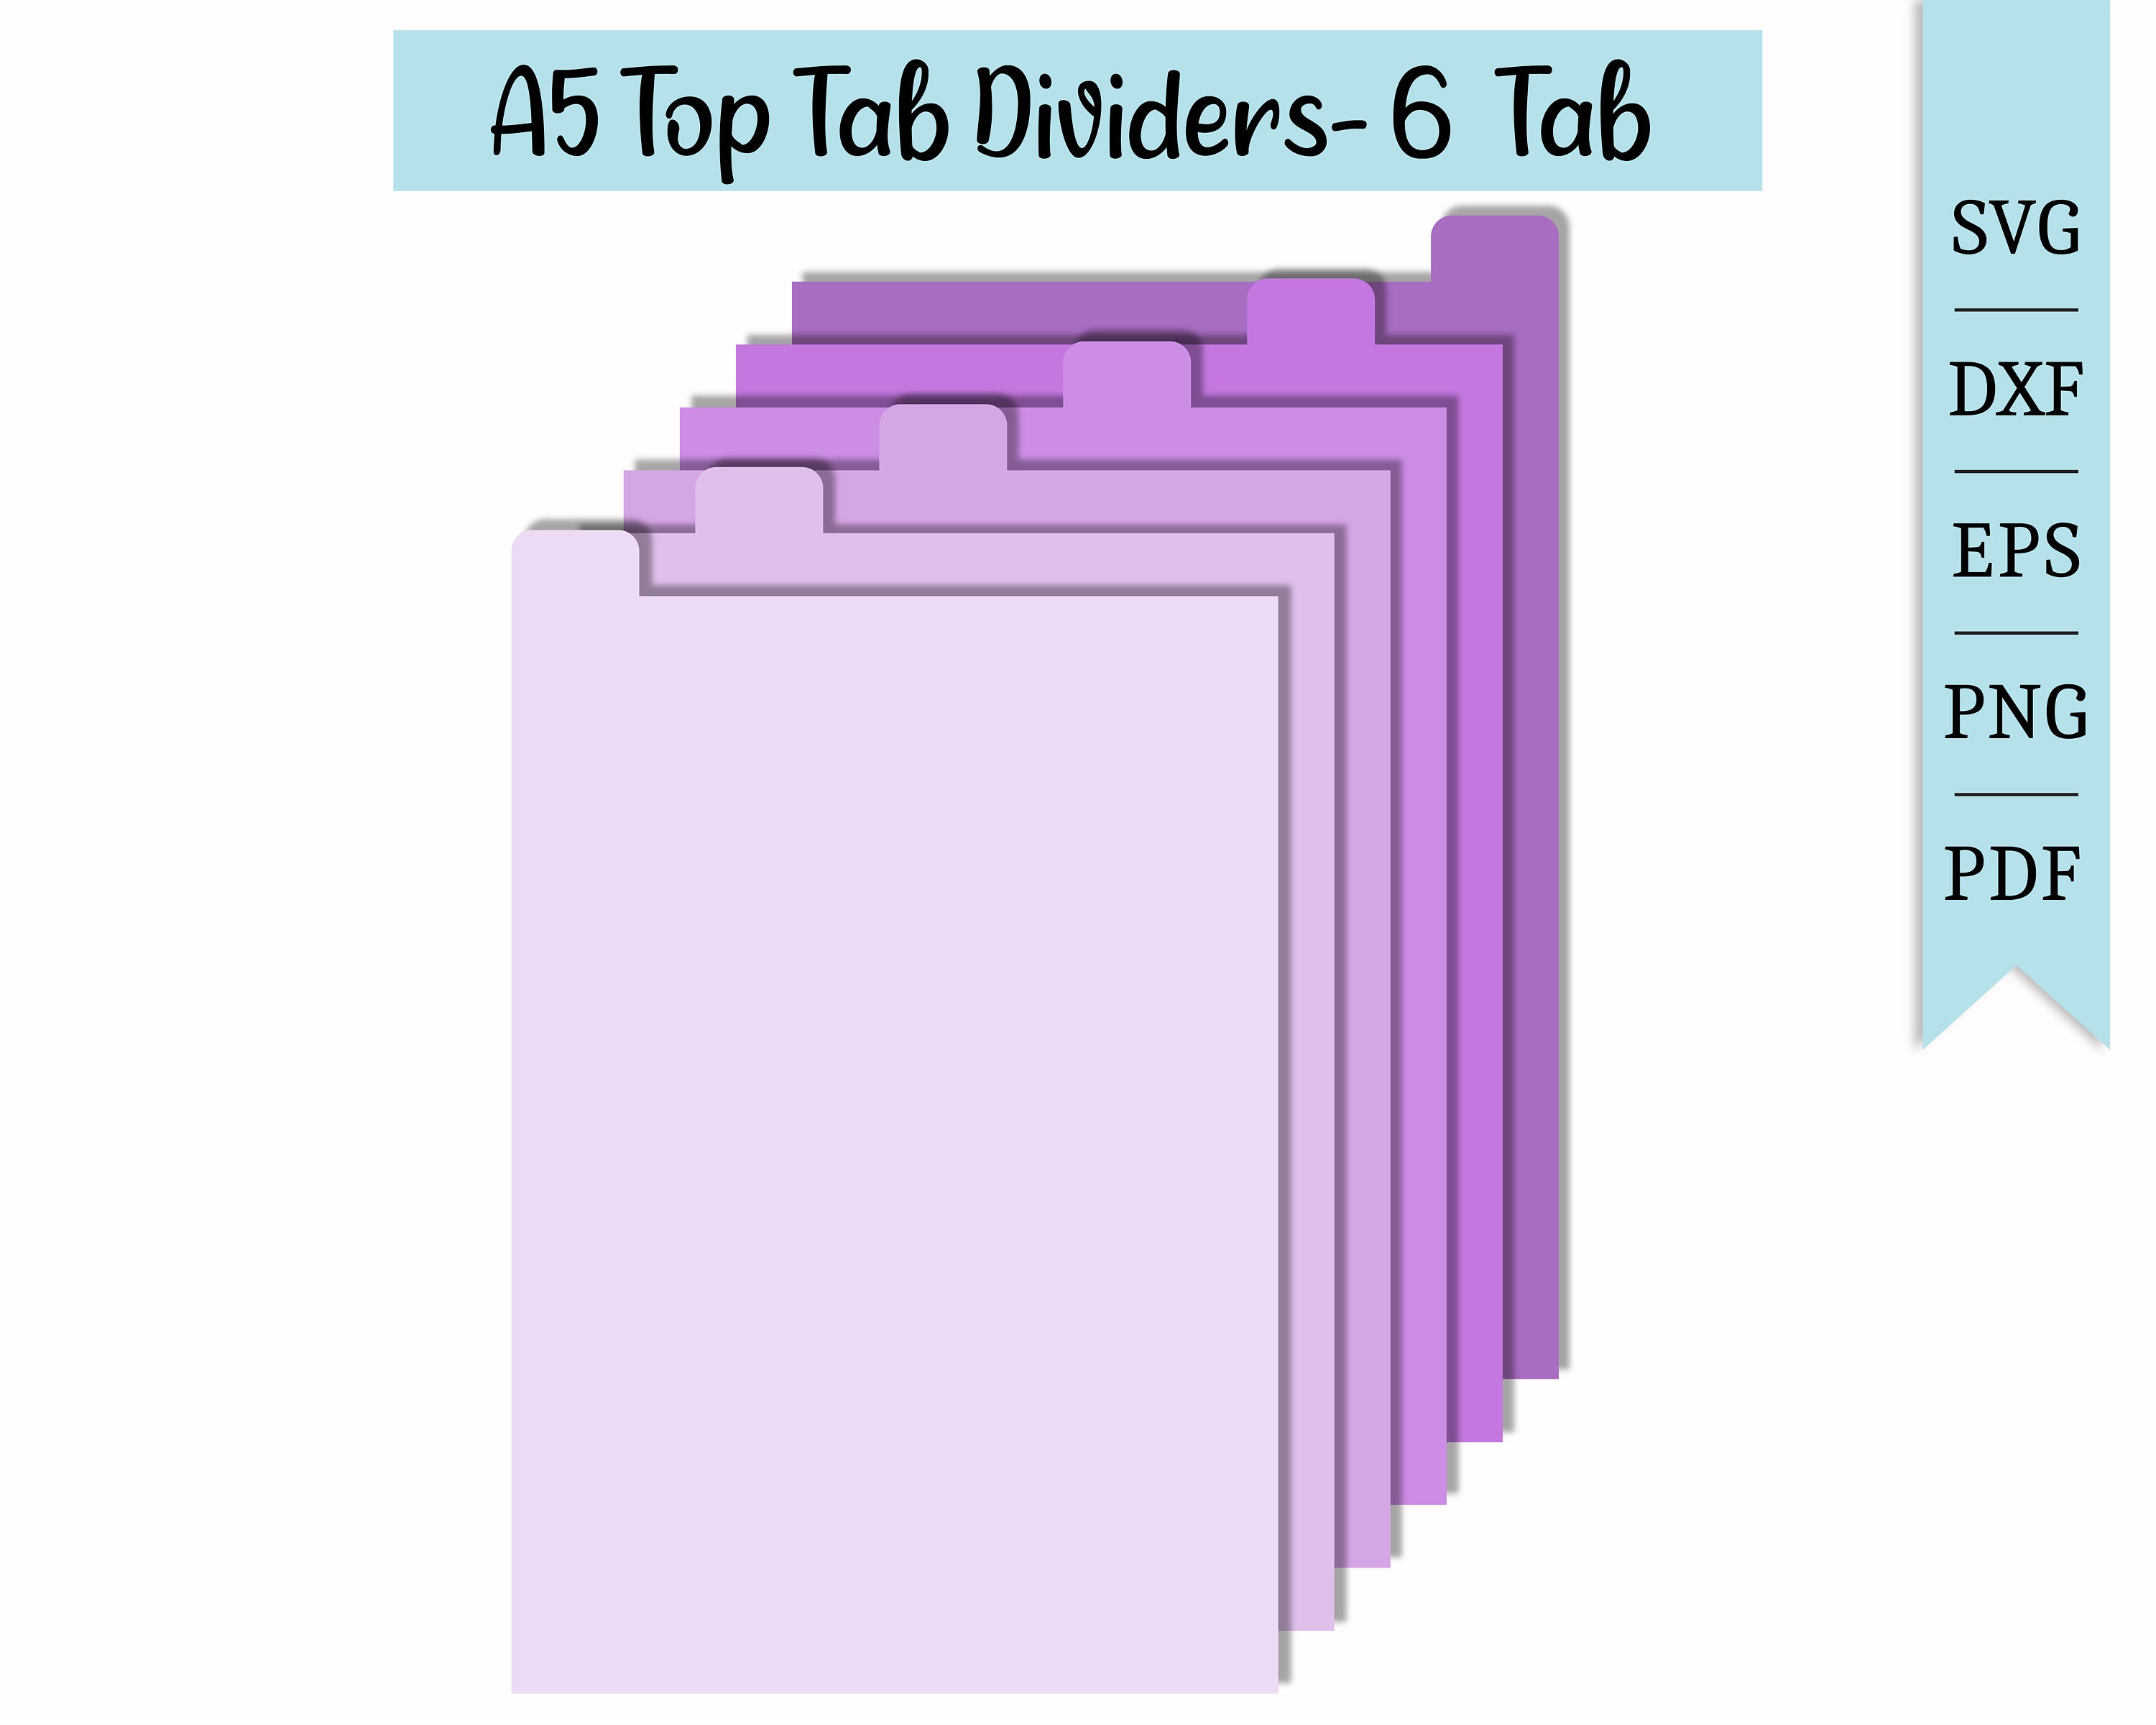 1-31 INDEX RECORD GUIDE CARDS 8x5 6x4 5x3 DAYS OF MONTH Daily Dividers Tabs  : UK